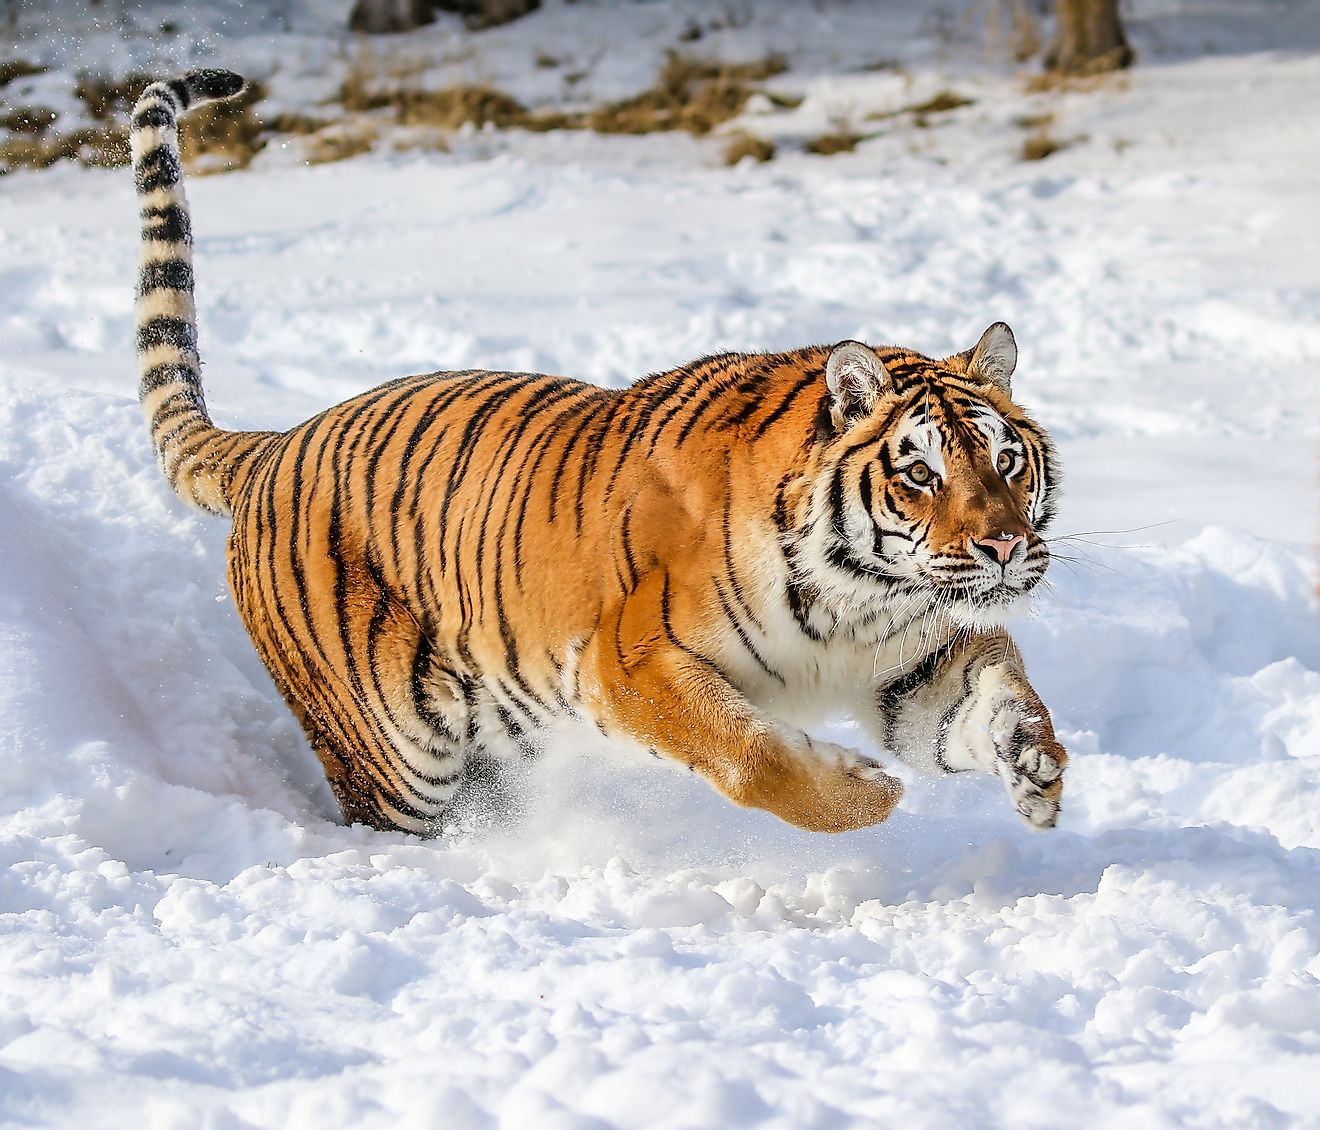 A gorgeous Siberian tiger in winter snow. Image credit: Holly S Cannon/Shutterstock.com